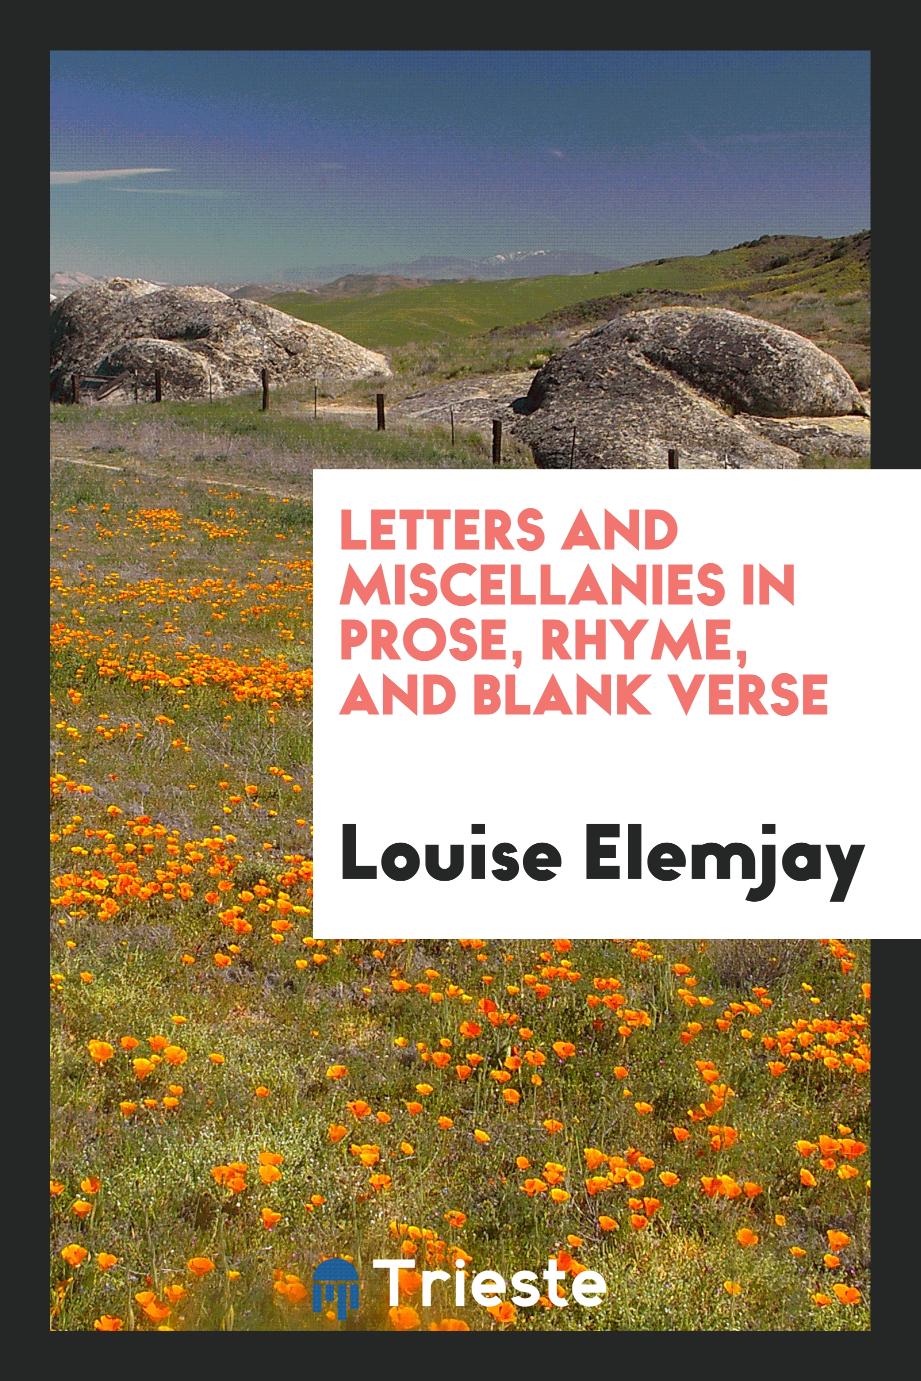 Letters and miscellanies in prose, rhyme, and blank verse